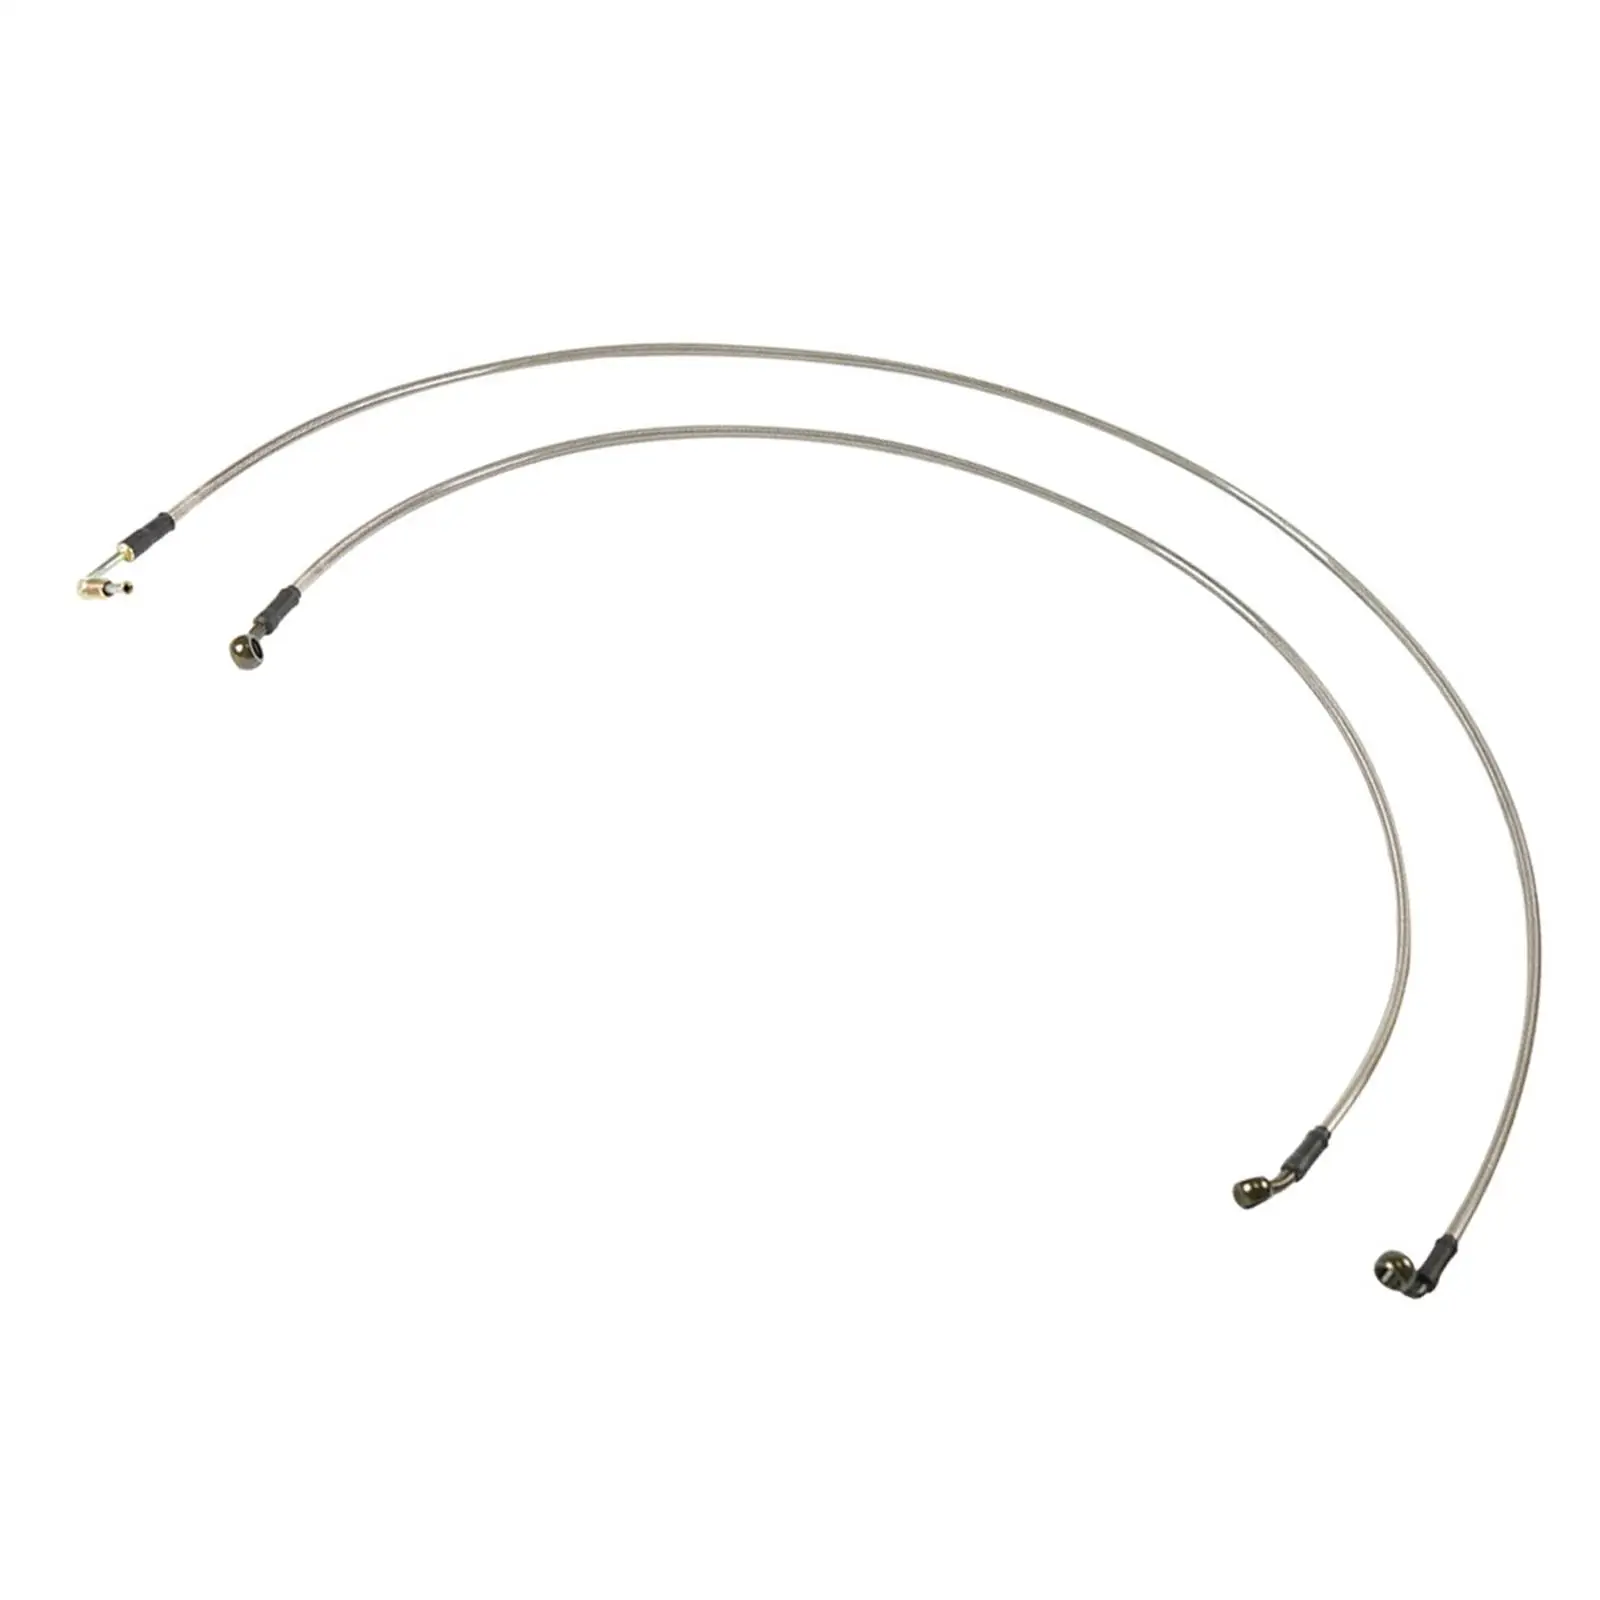 1Pair Brake Lines Replace Extended Front & Rear Brake Lines Fit for Polaris RZR 800 4 800 XP 900